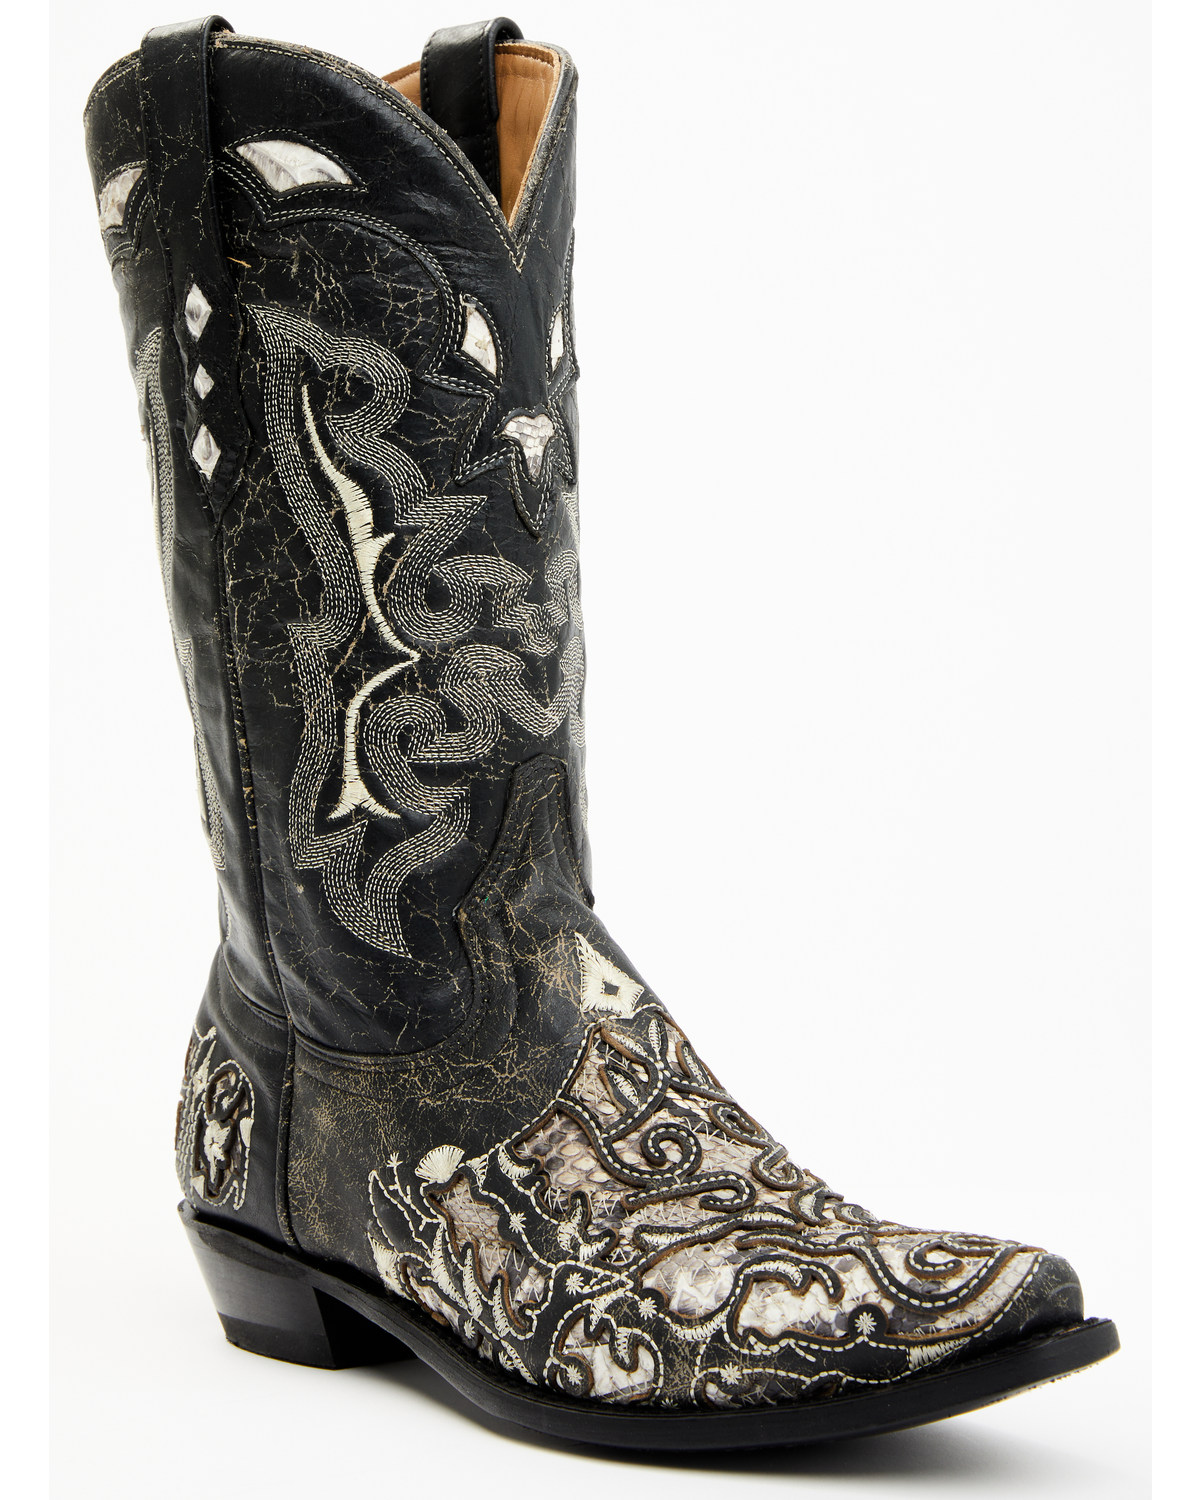 Corral Men's Exotic Python Skin Inlay Western Boots - Snip Toe